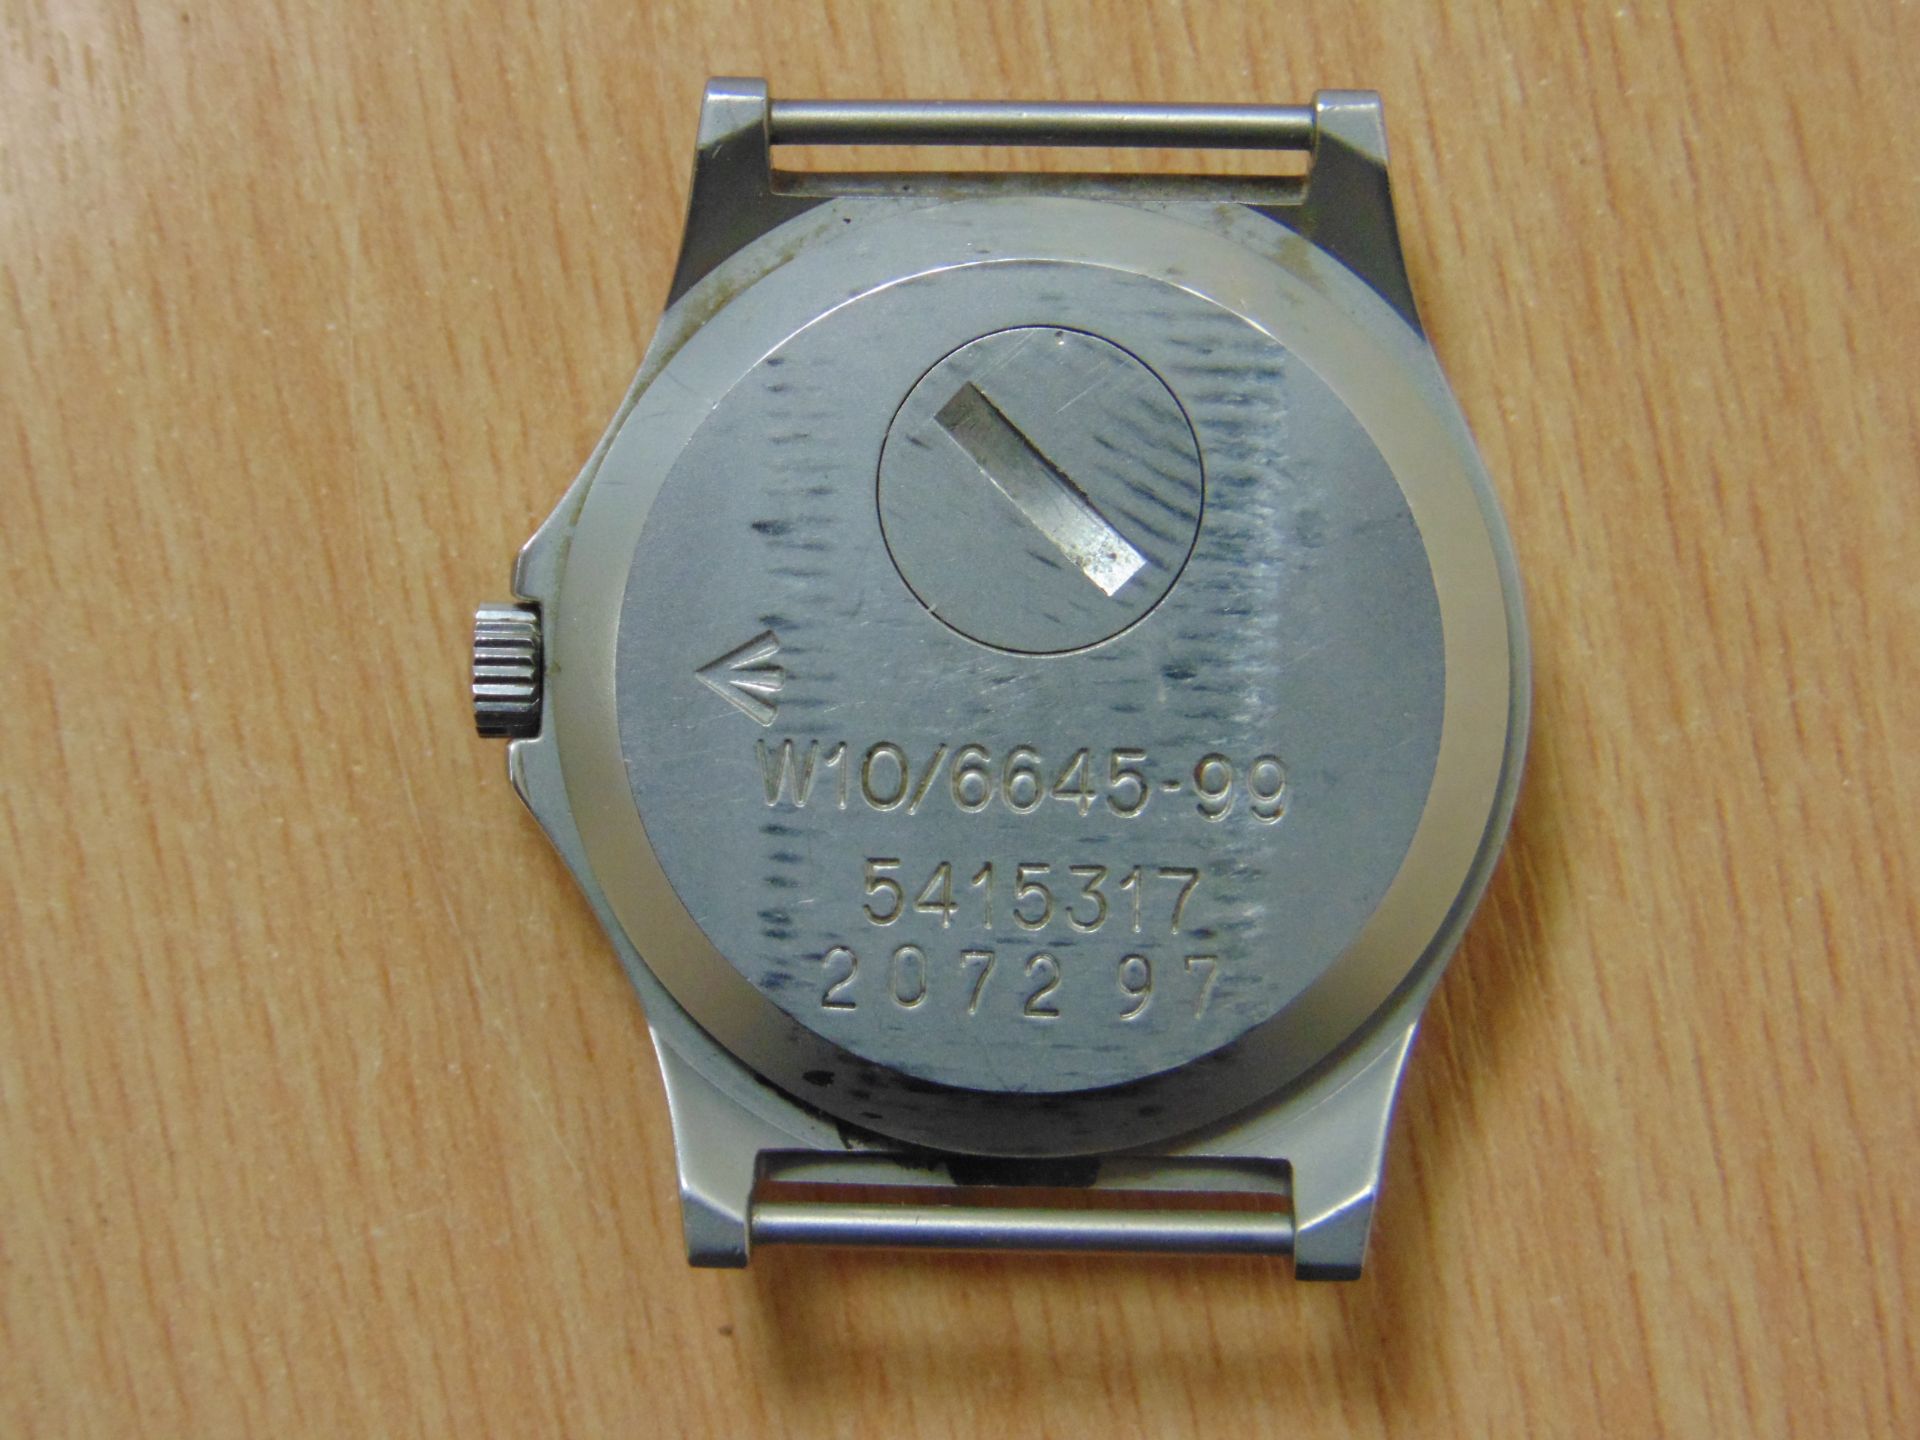 VERY NICE CWC W10 BRITISH ARMY SERVICE WATCH NATO MARKED DATED 1997 - Image 4 of 8